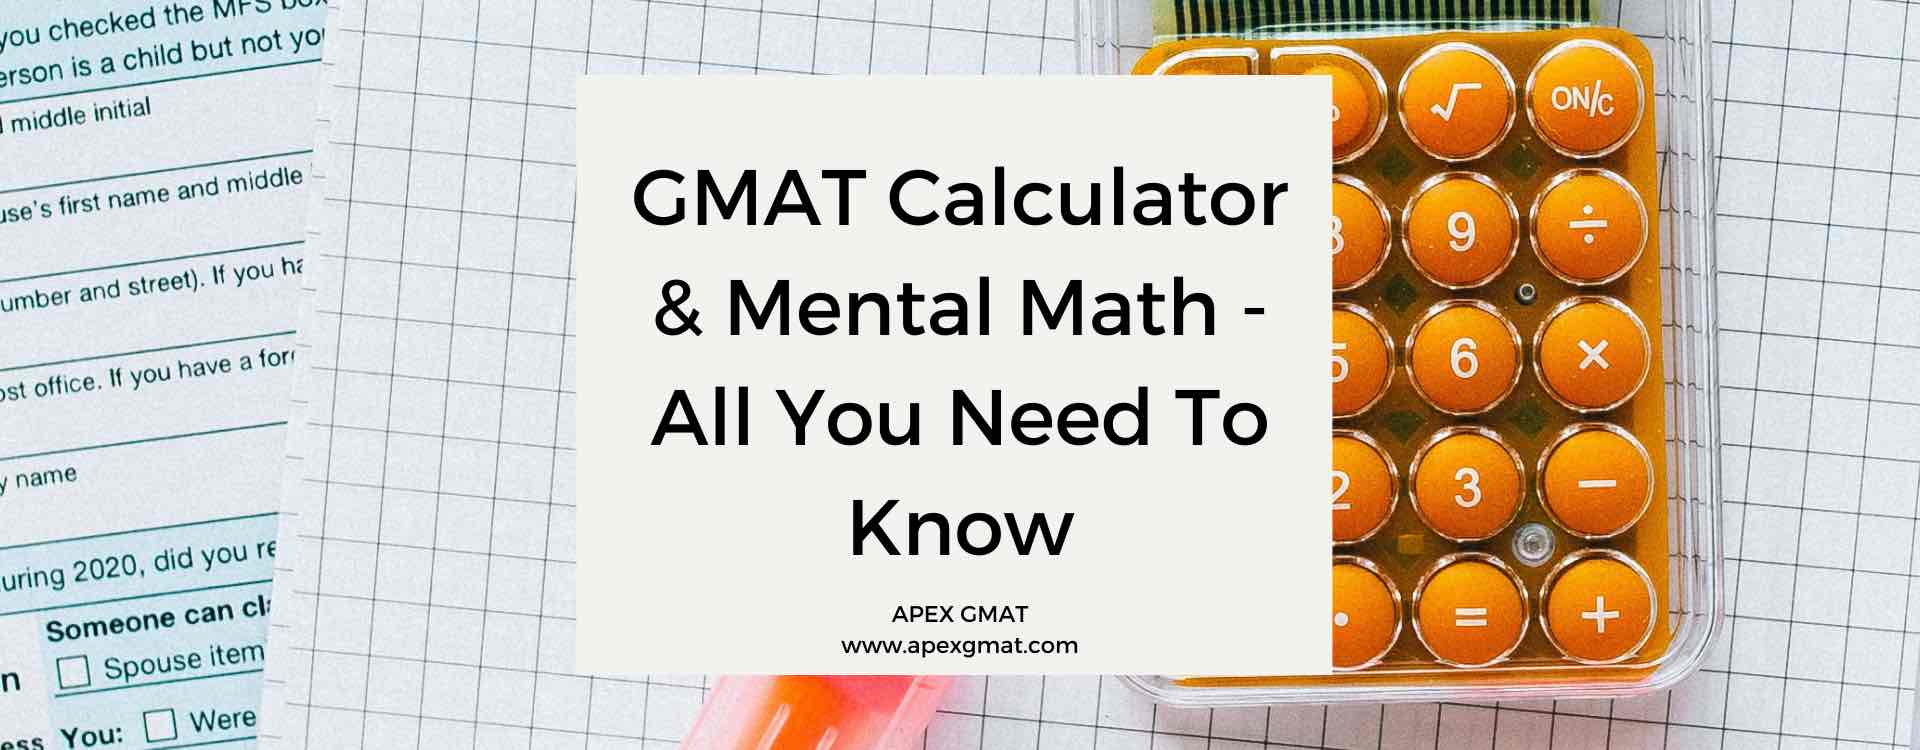 GMAT Calculator & Mental Math – All You Need To Know